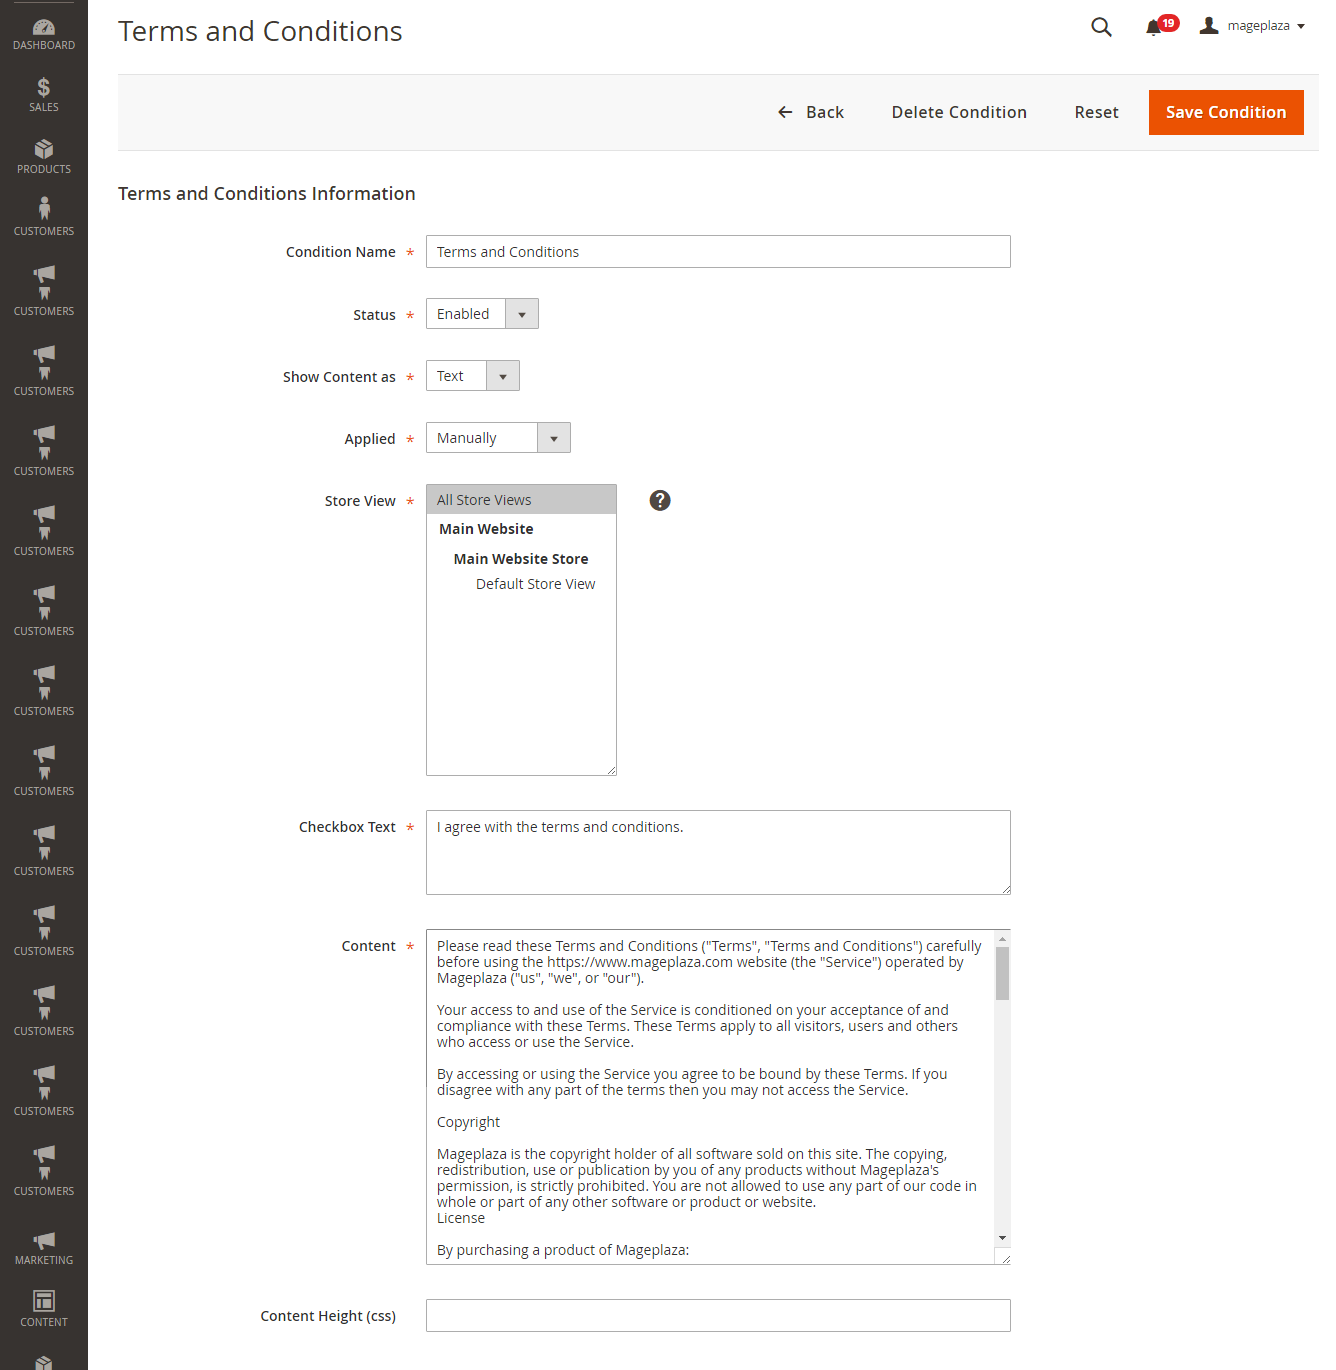 creating new terms and conditions in Magento 2